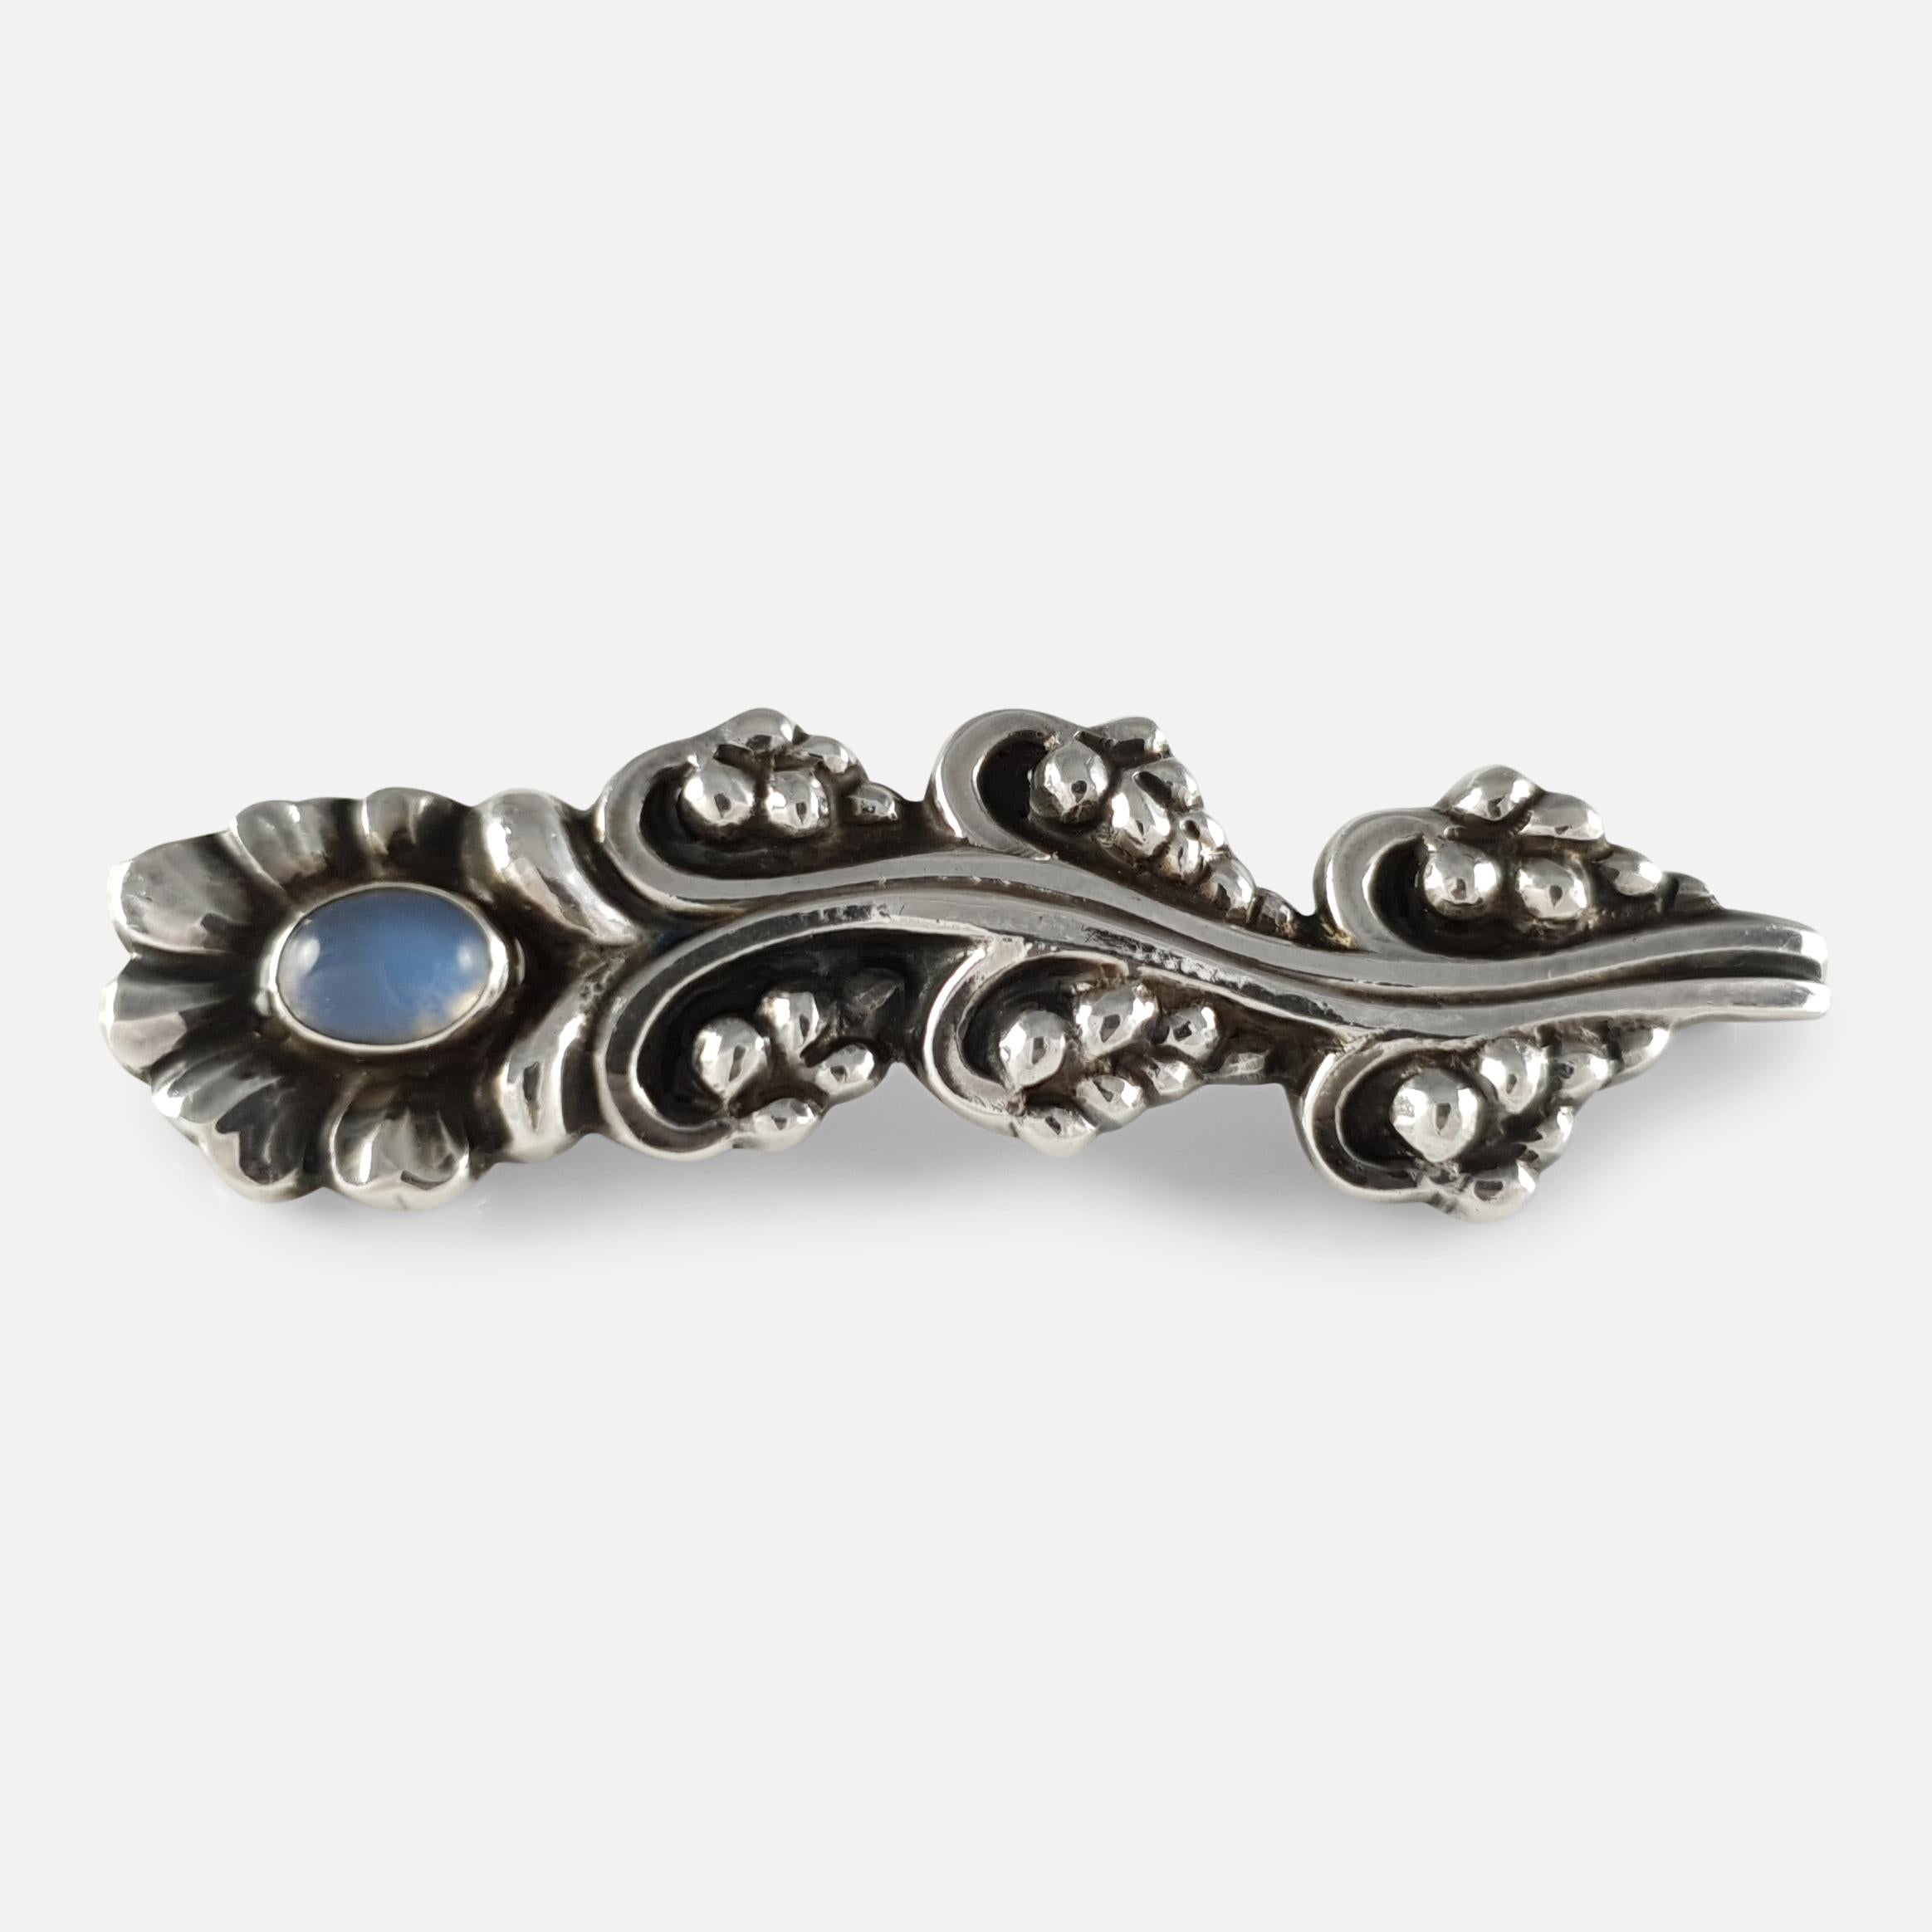 Description: - A superb Georg Jensen silver and moonstone brooch #104, circa 1933-1944.  The brooch is of floral spray-design and set with a moonstone cabochon. The brooch is stamped with the GJ makers marking (used from 1933-1944), 925 mark to